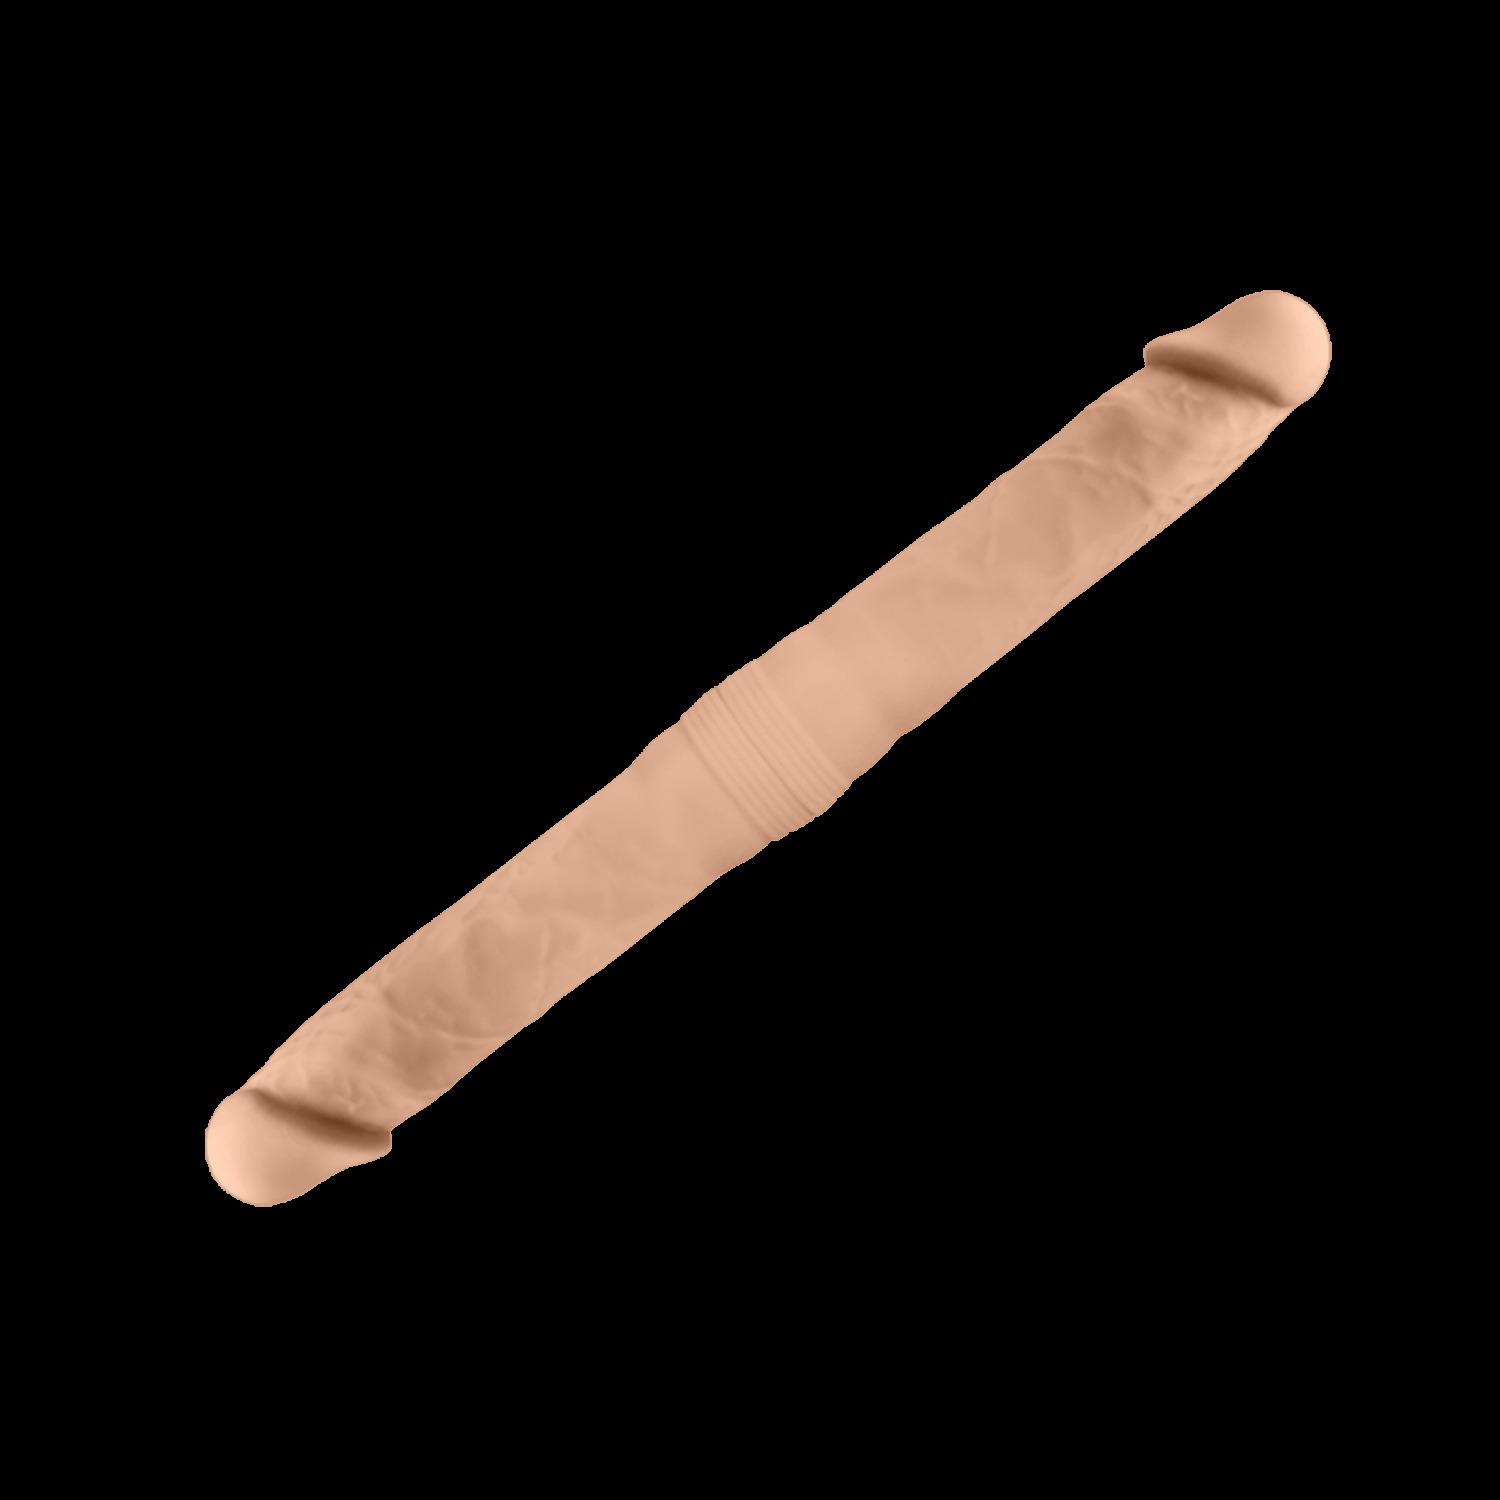 SILEXD Premium Silicone Model 1 Double Dong S, 38,5 cm, Flesh